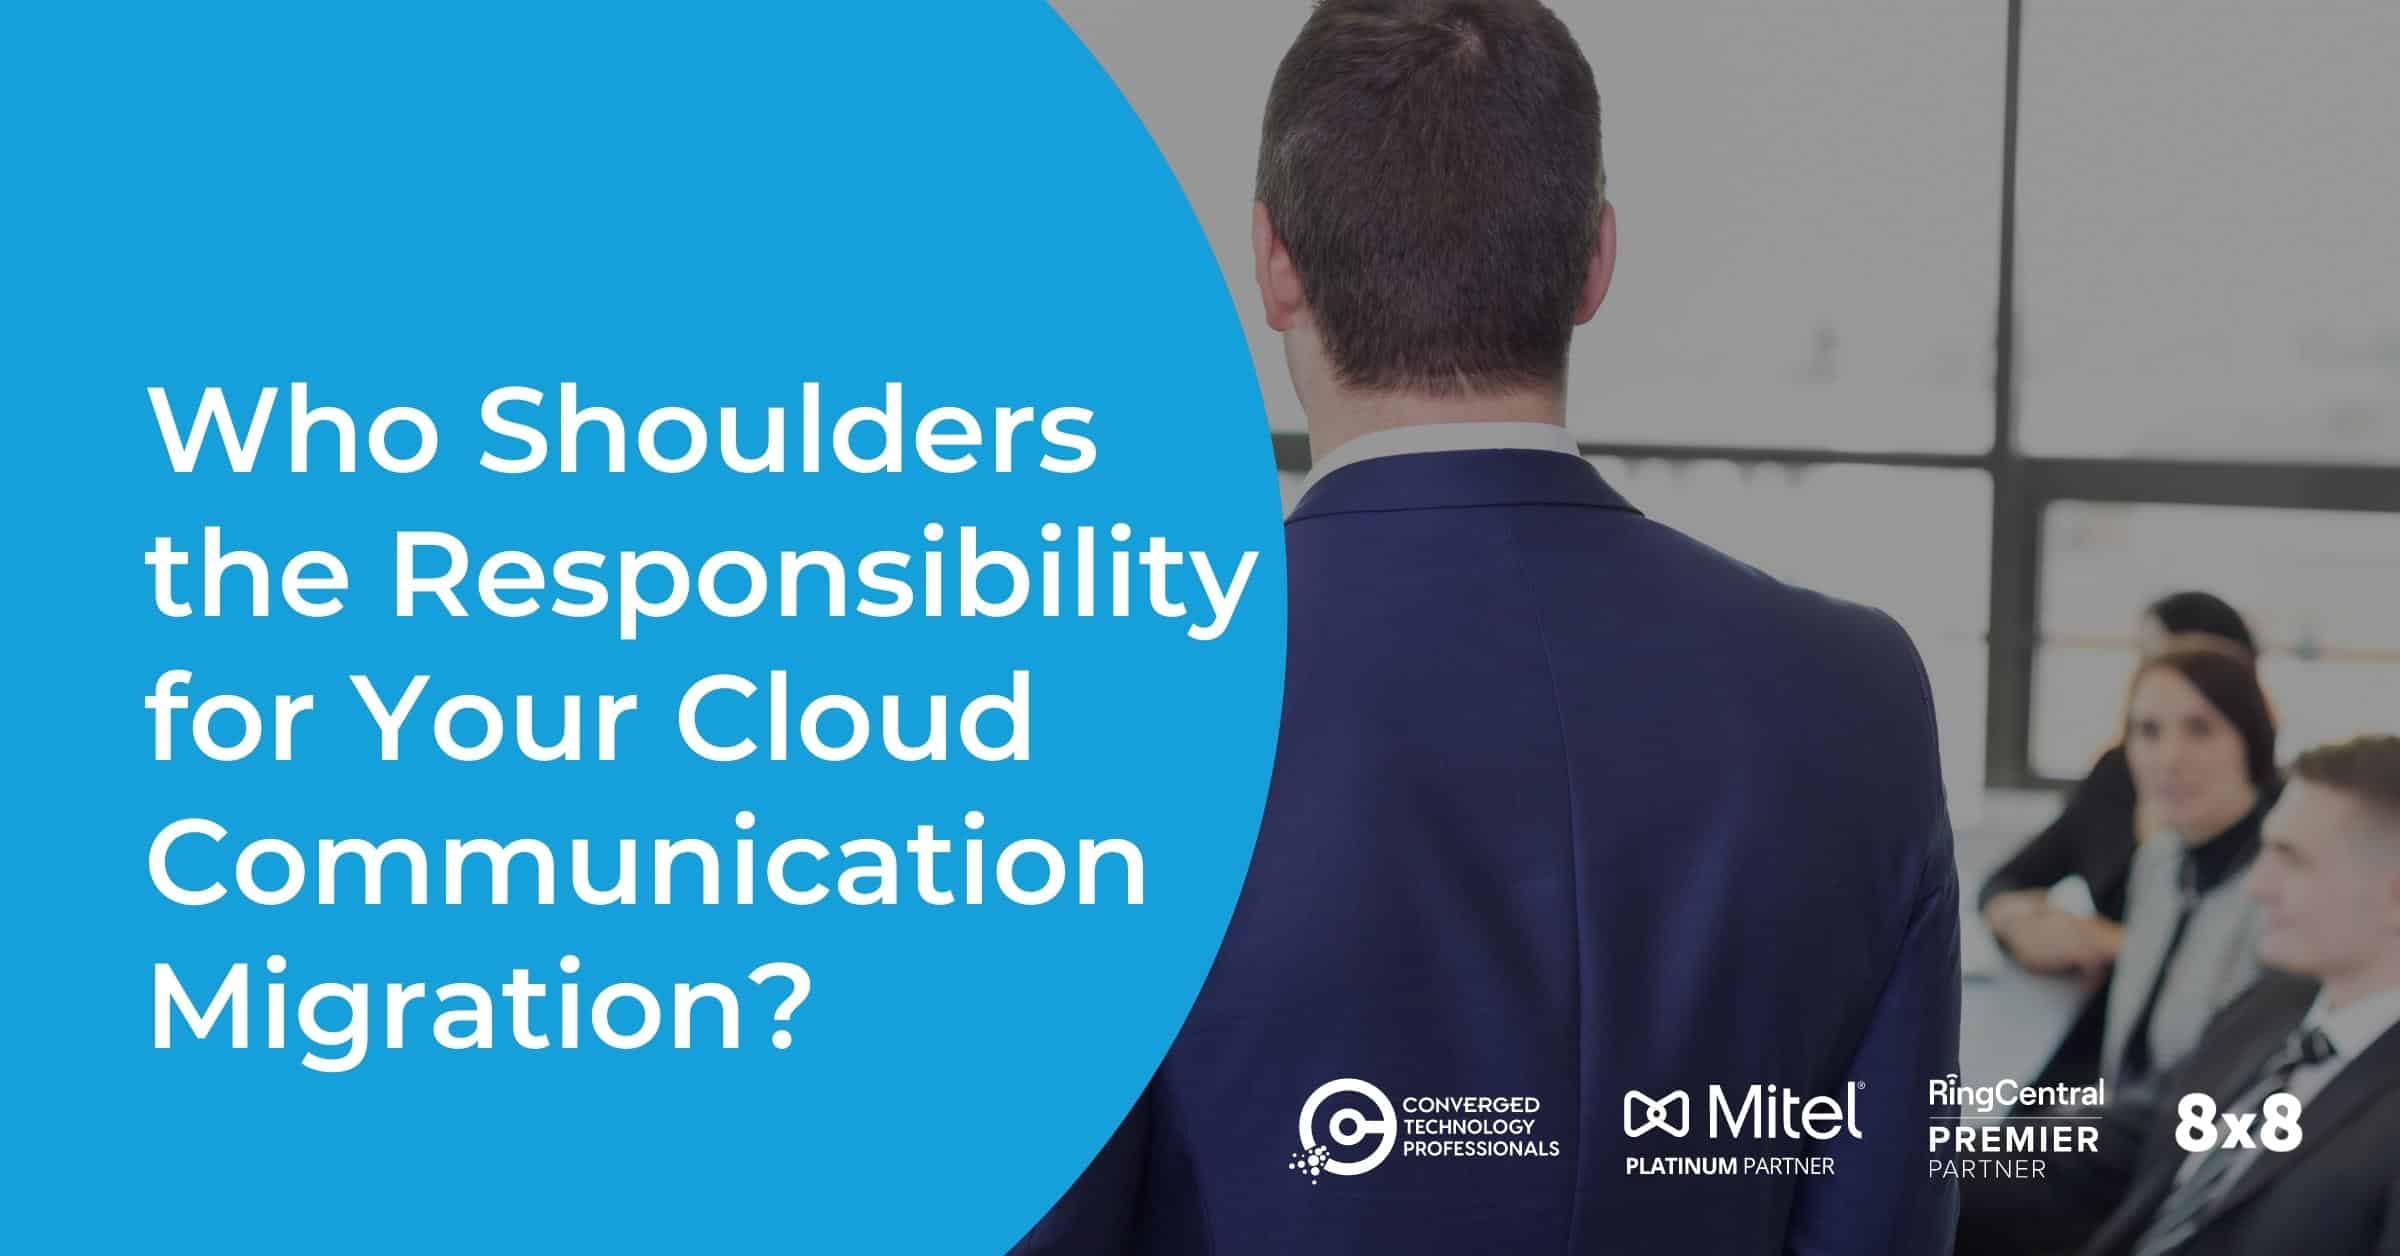 Who Shoulders the Responsibility for Your Cloud Communication Migration